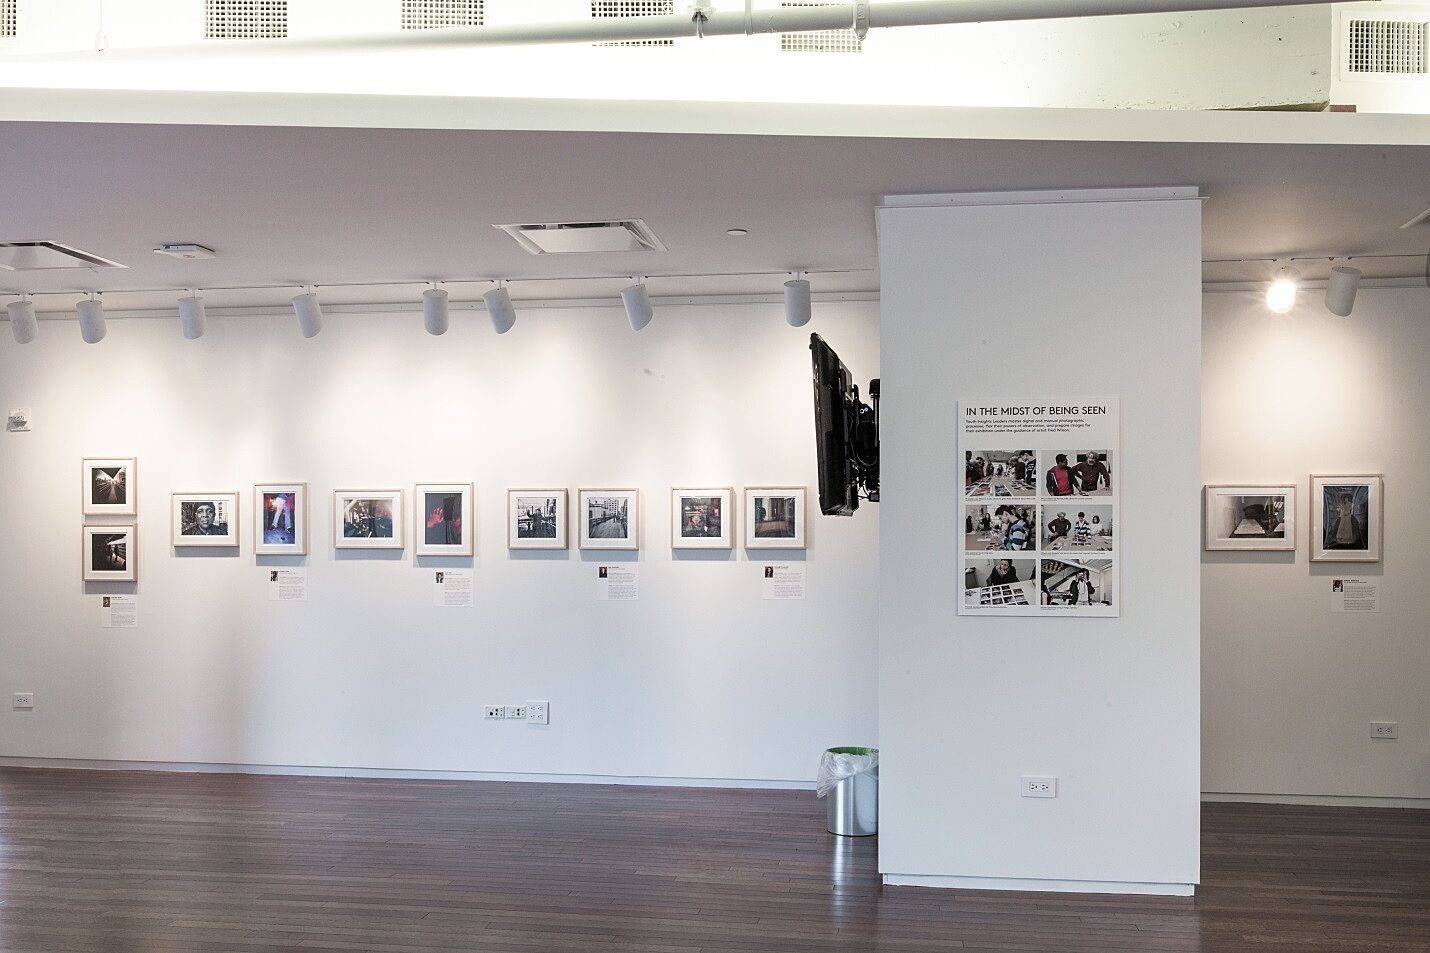 Photographs placed on wall.